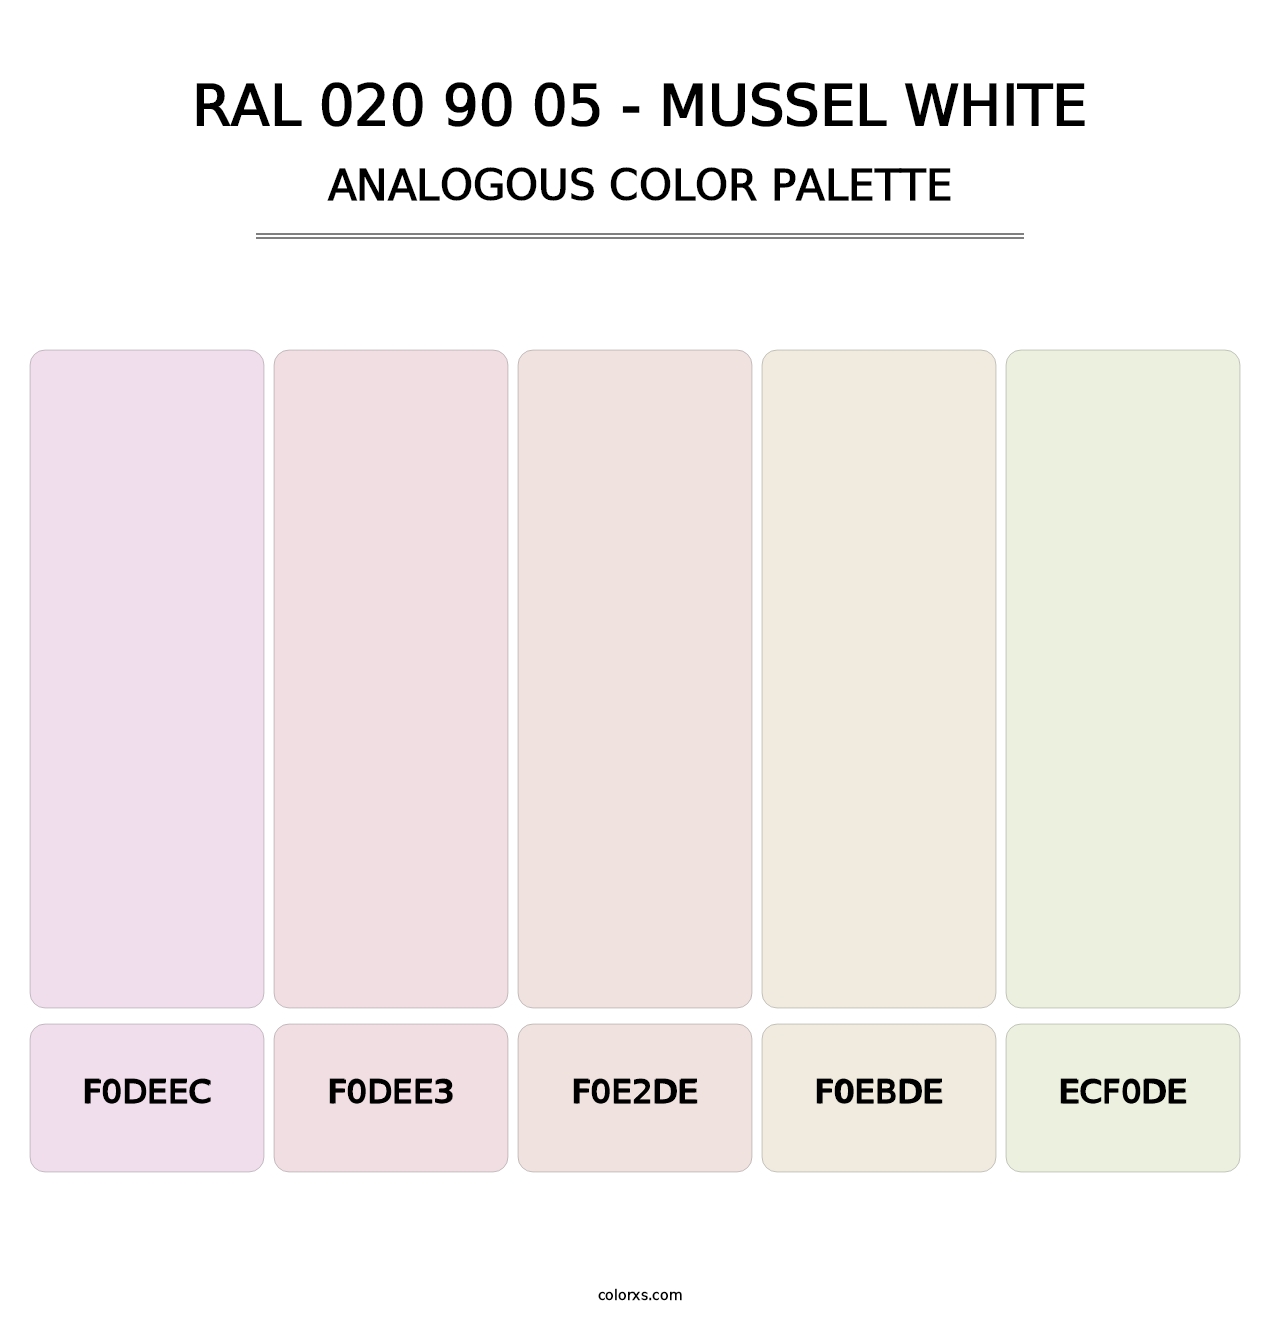 RAL 020 90 05 - Mussel White - Analogous Color Palette